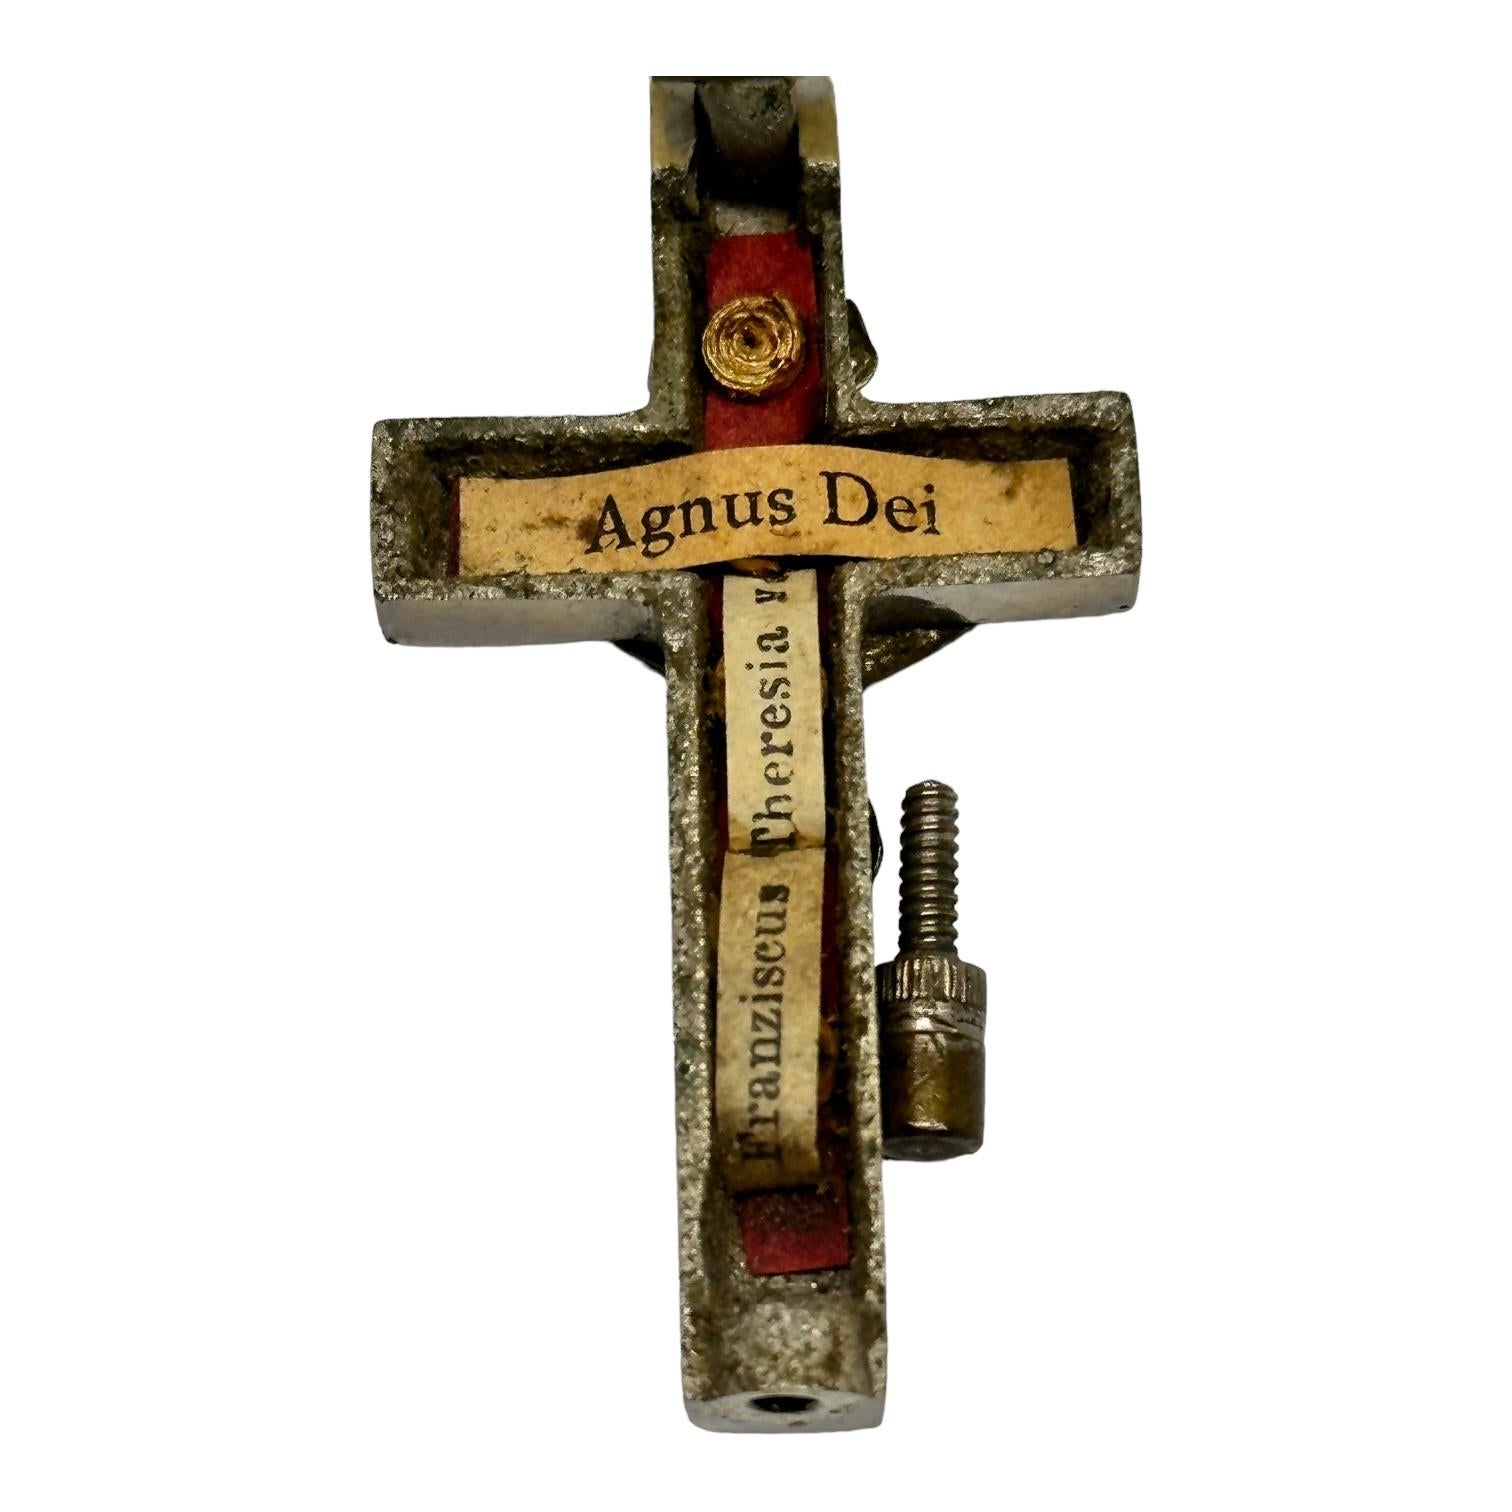 Mid-20th Century small Antique Catholic Reliquary Box Crucifix Pendant with Relics of Saints For Sale